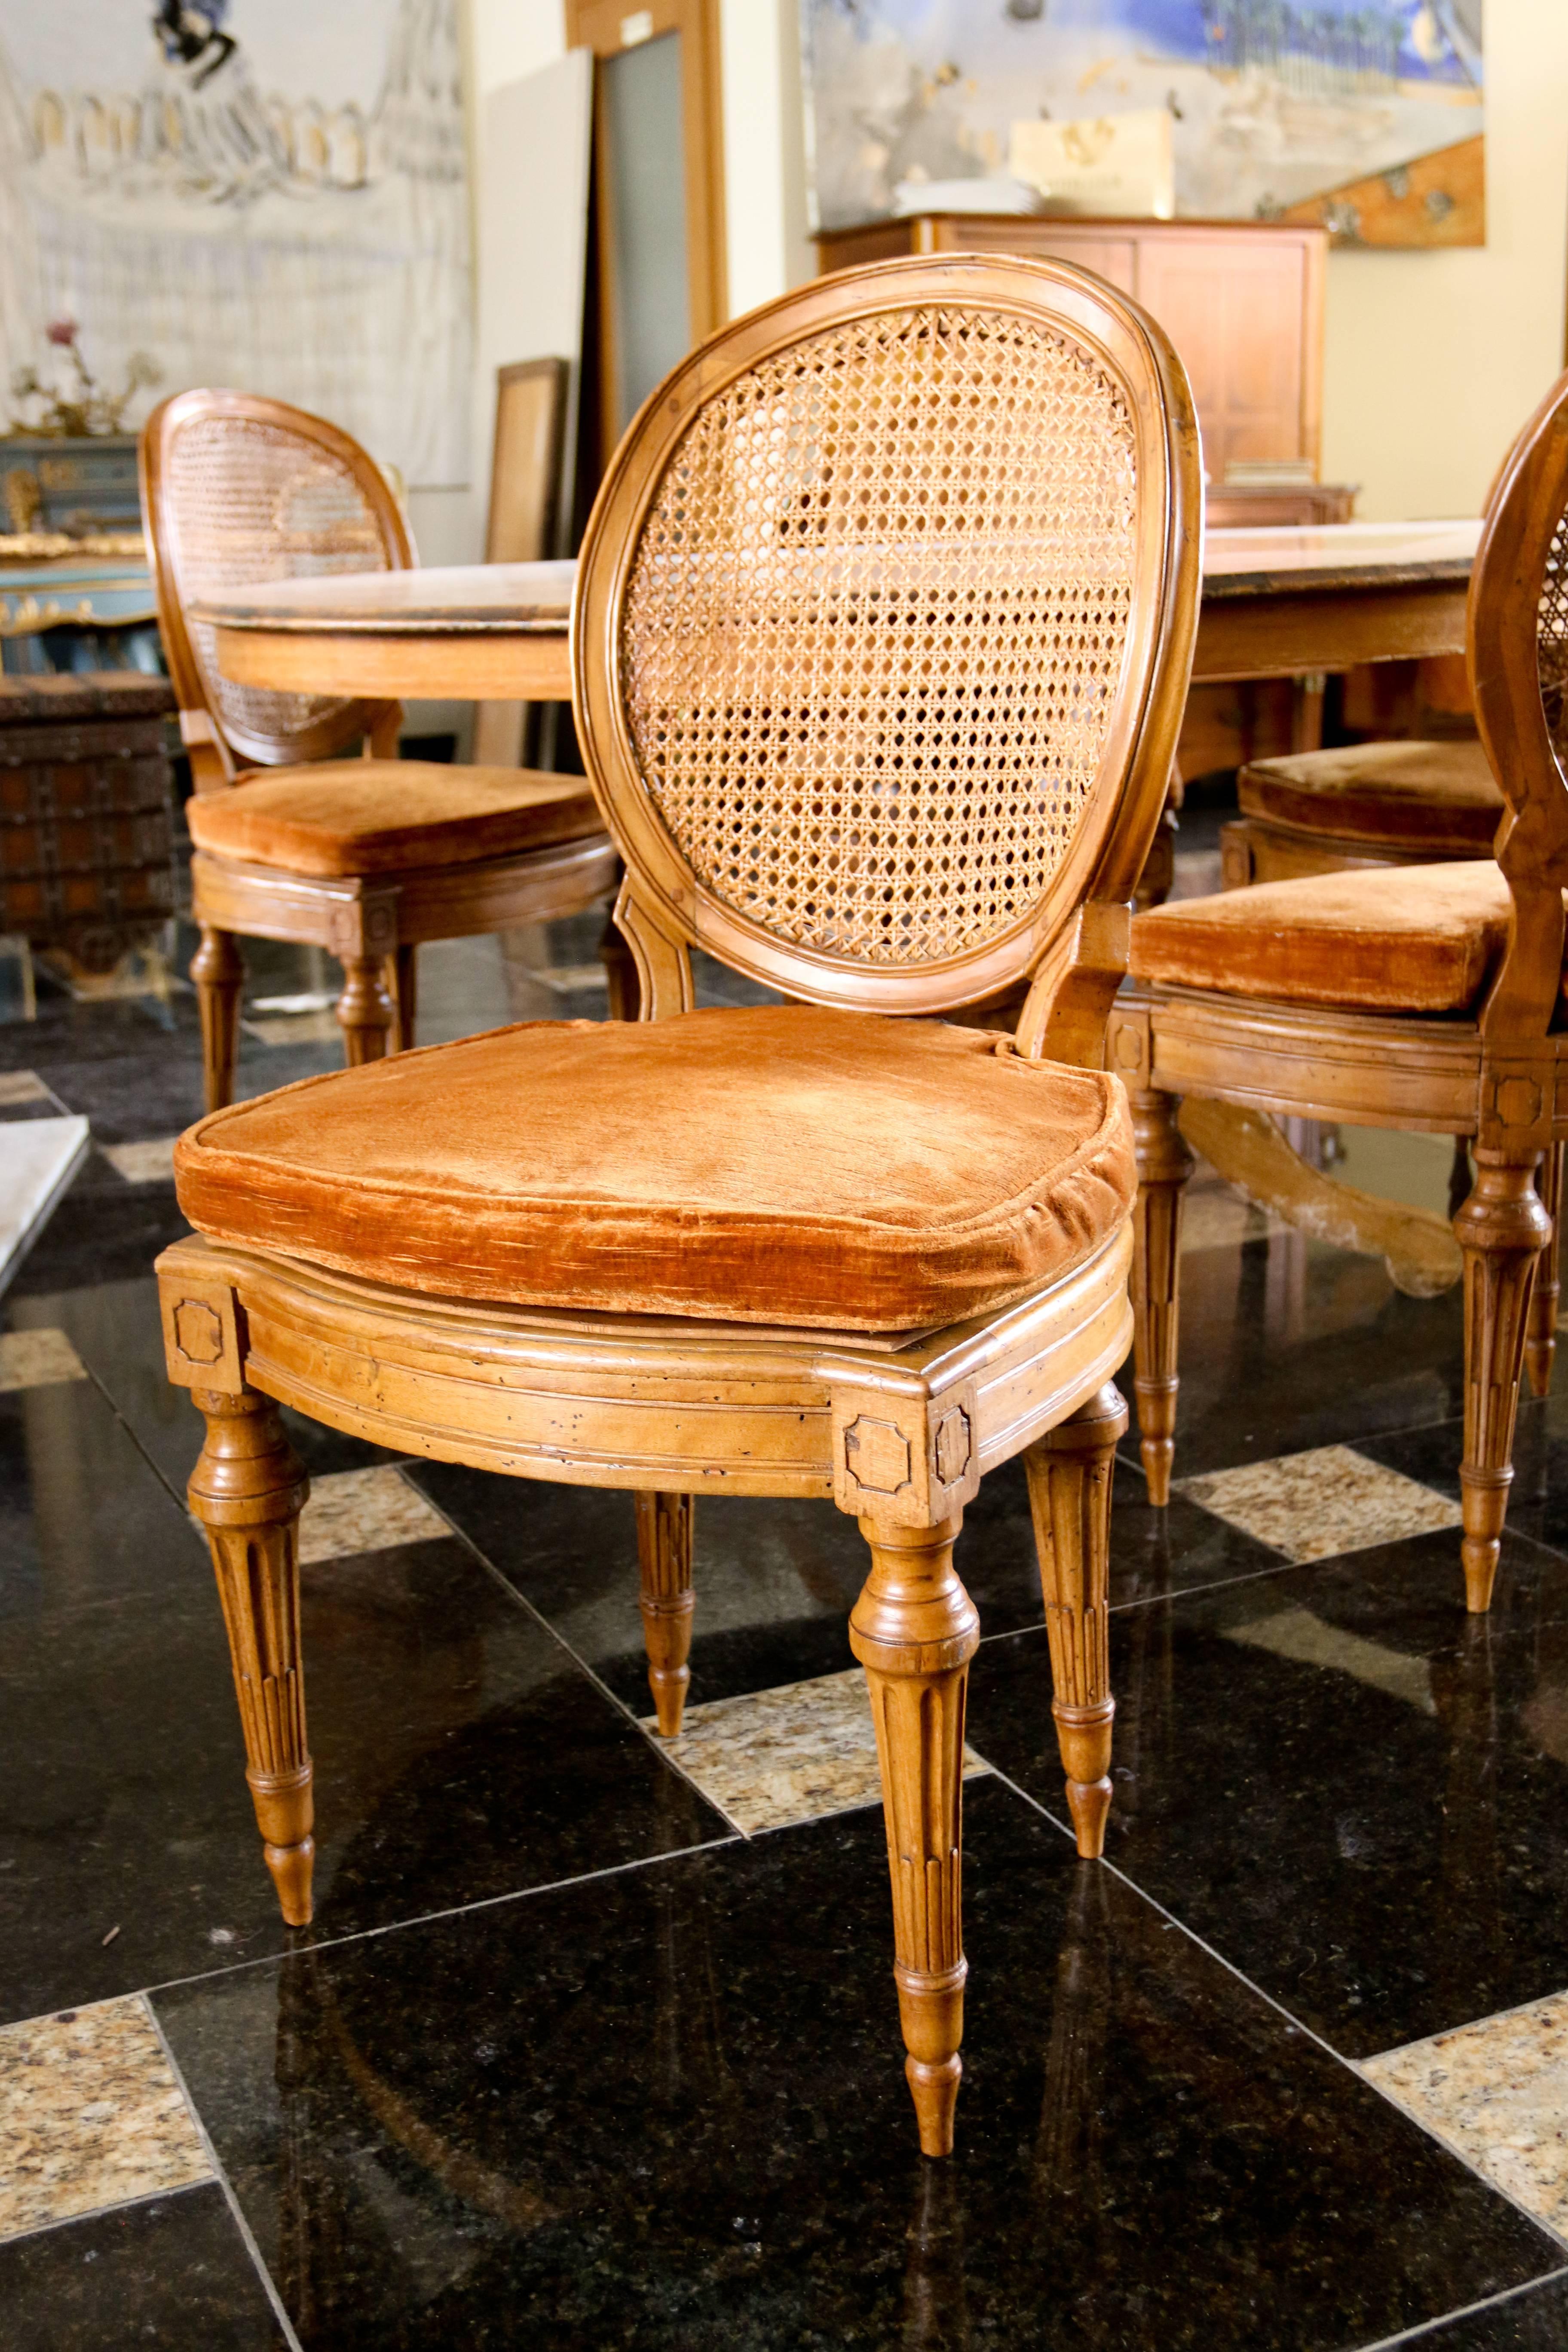 Set of six 18th century French carved walnut dining chairs from Louis XVI period.
With hand-caned seats and backs and with comfortable cushions. The chairs are raised on elegantly carved legs. All six are very stable as construction and the cane is